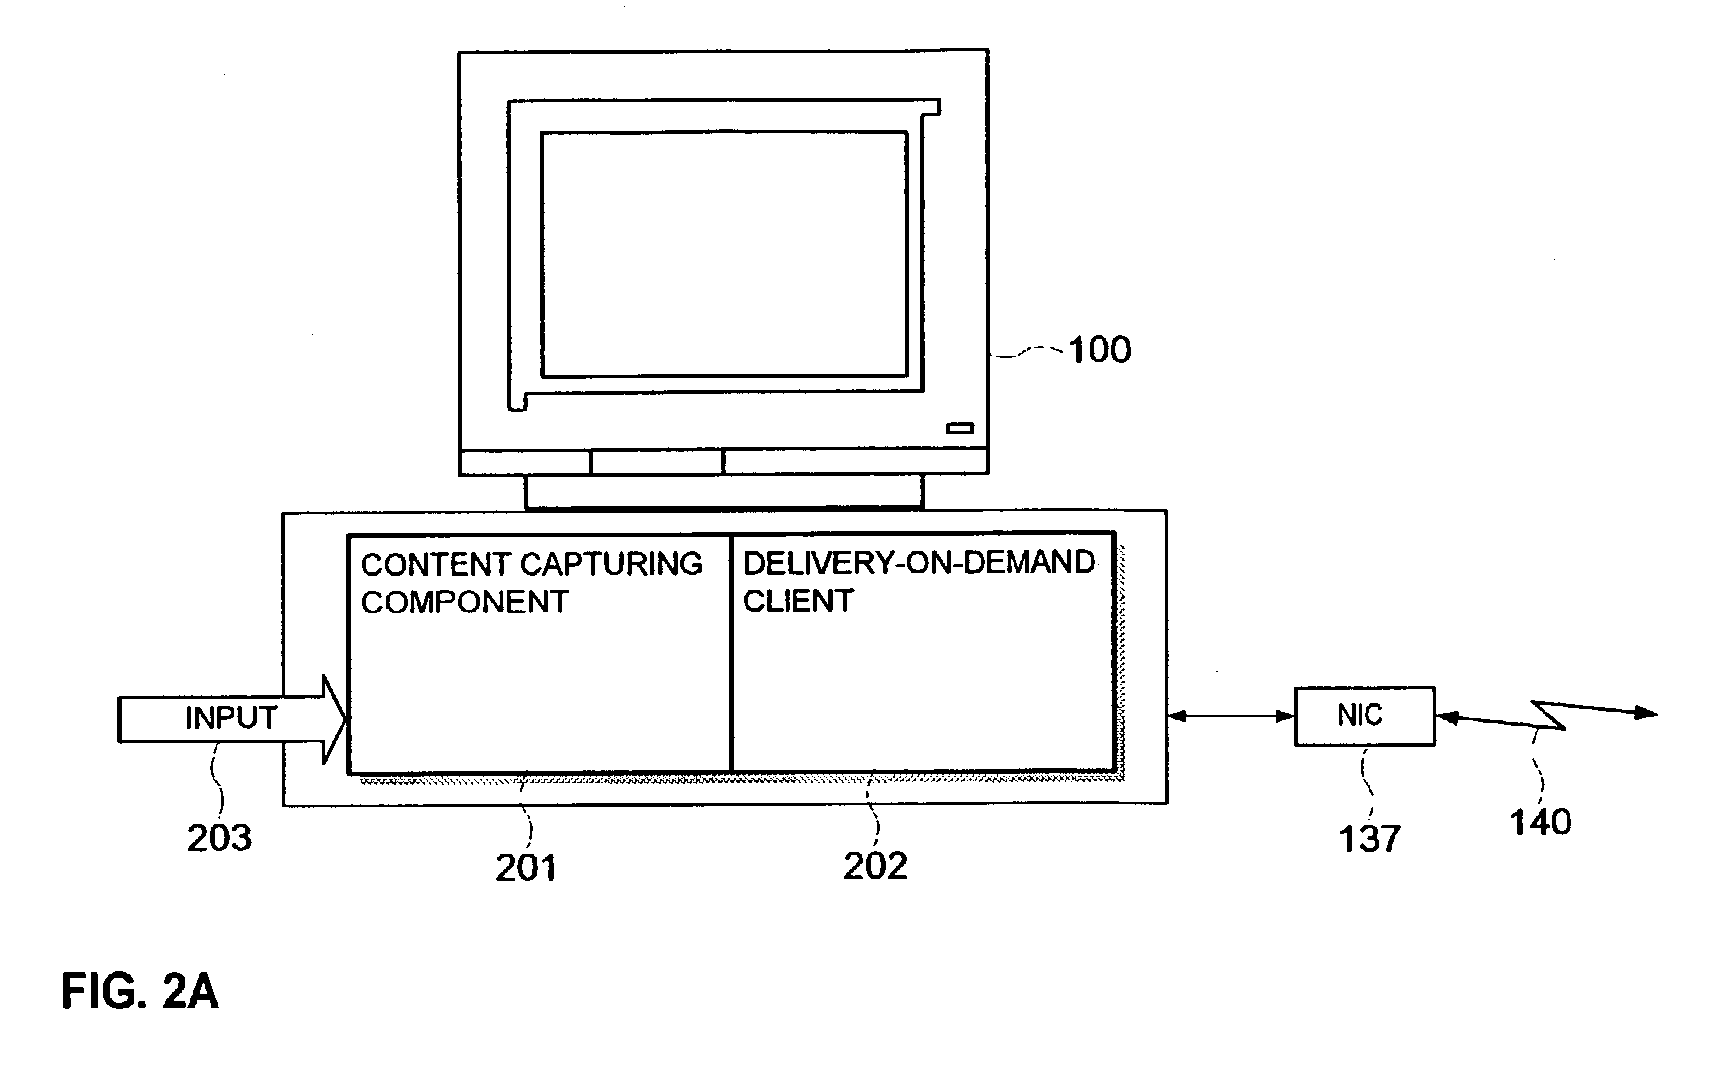 Method and system for instantaneous on-demand delivery of multimedia content over a communication network with aid of content capturing component, delivery-on-demand client and dynamically mapped resource locator server